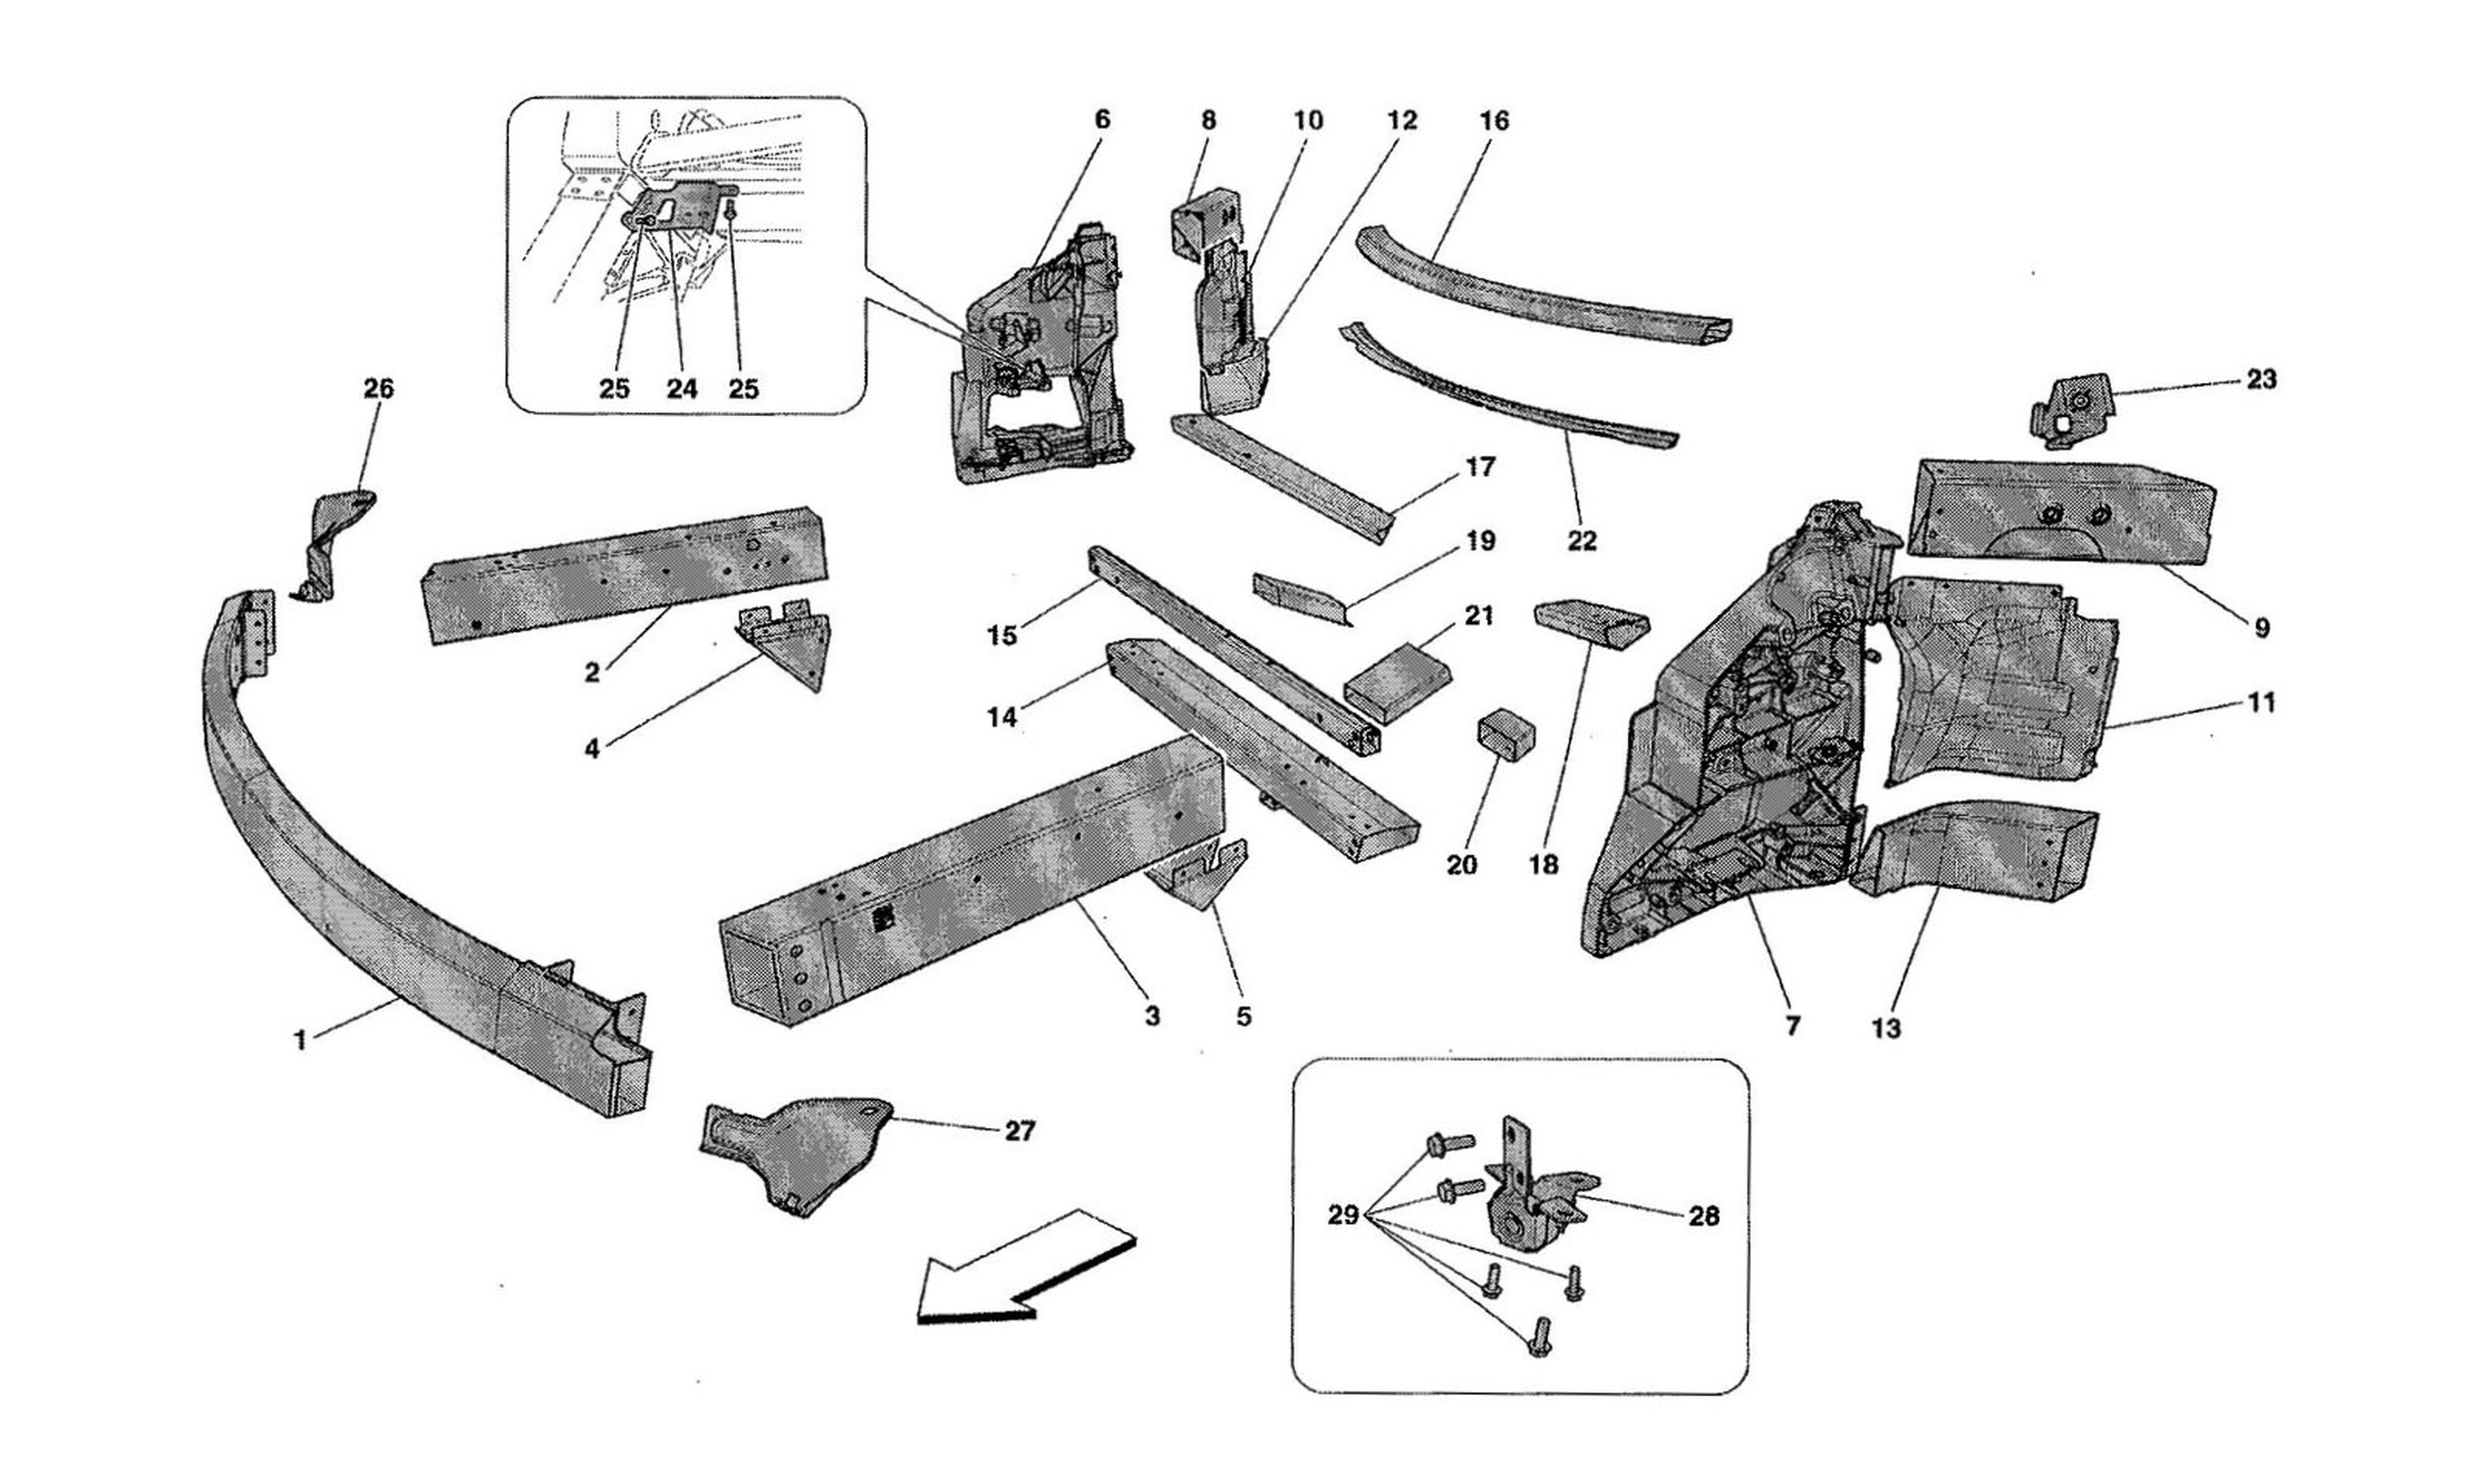 Schematic: Chassis - Structure, Front Elements And Panels